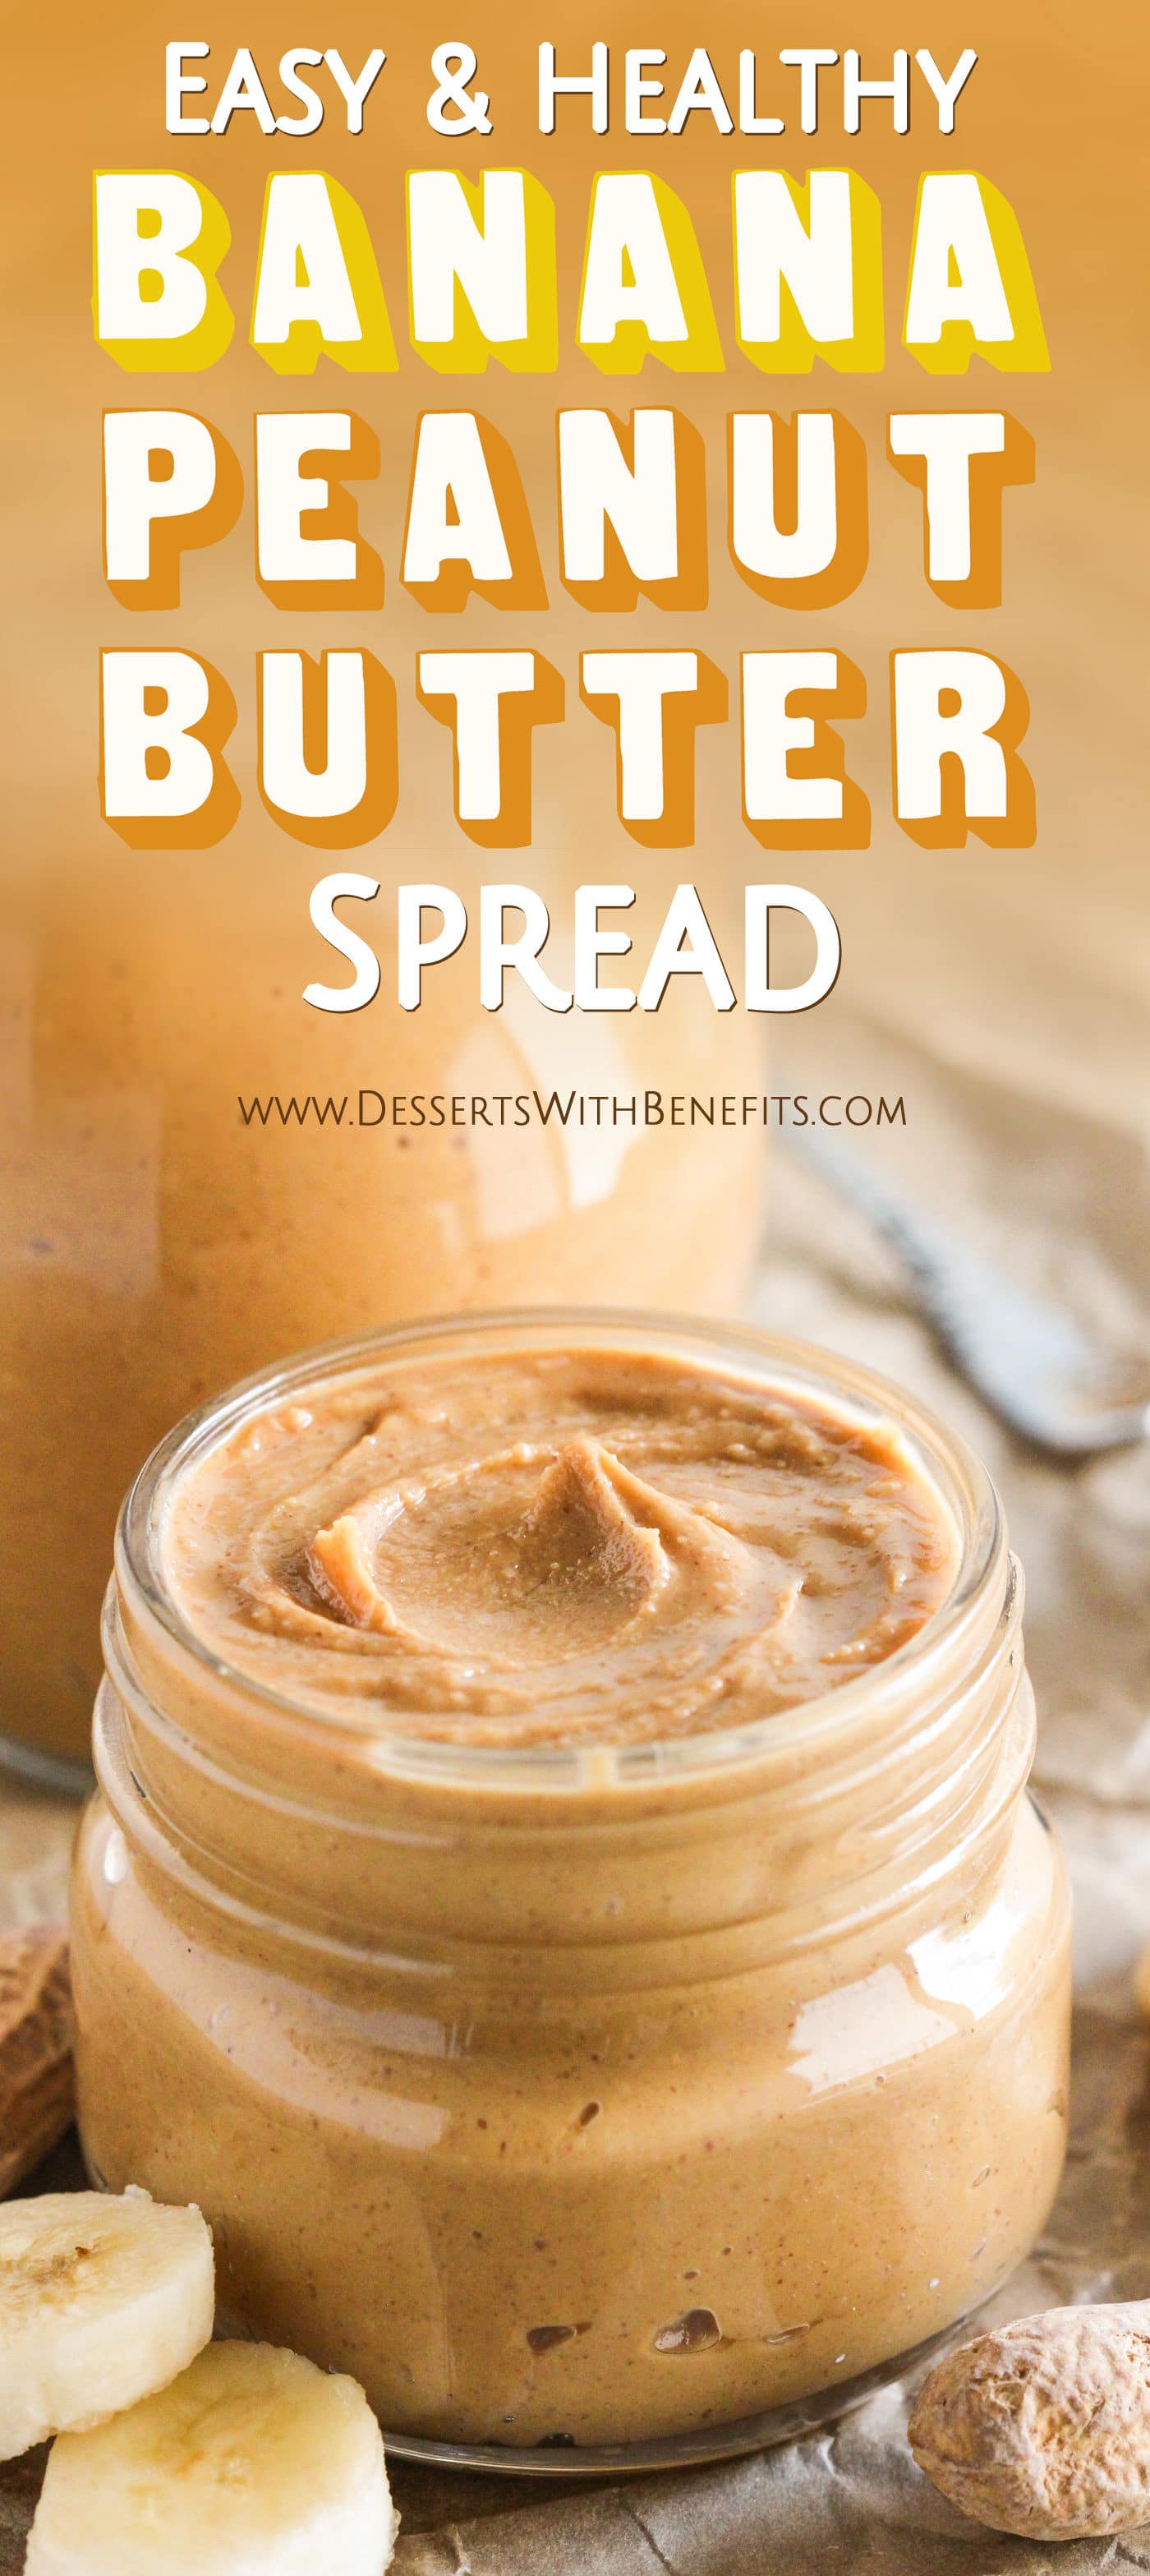 Healthy Homemade Banana Peanut Butter Spread! If you like bananas and if you like peanut butter, then you’ll LOVE this. 100% delicious and perfect on toast, oatmeal, ice cream, or a spoon alone! No sugar added (refined sugar free), gluten free, vegan. Healthy Dessert Recipes with low calorie, low fat, low carb, high protein, dairy free, vegan, and raw options at the Desserts With Benefits Blog (www.DessertsWithBenefits.com)